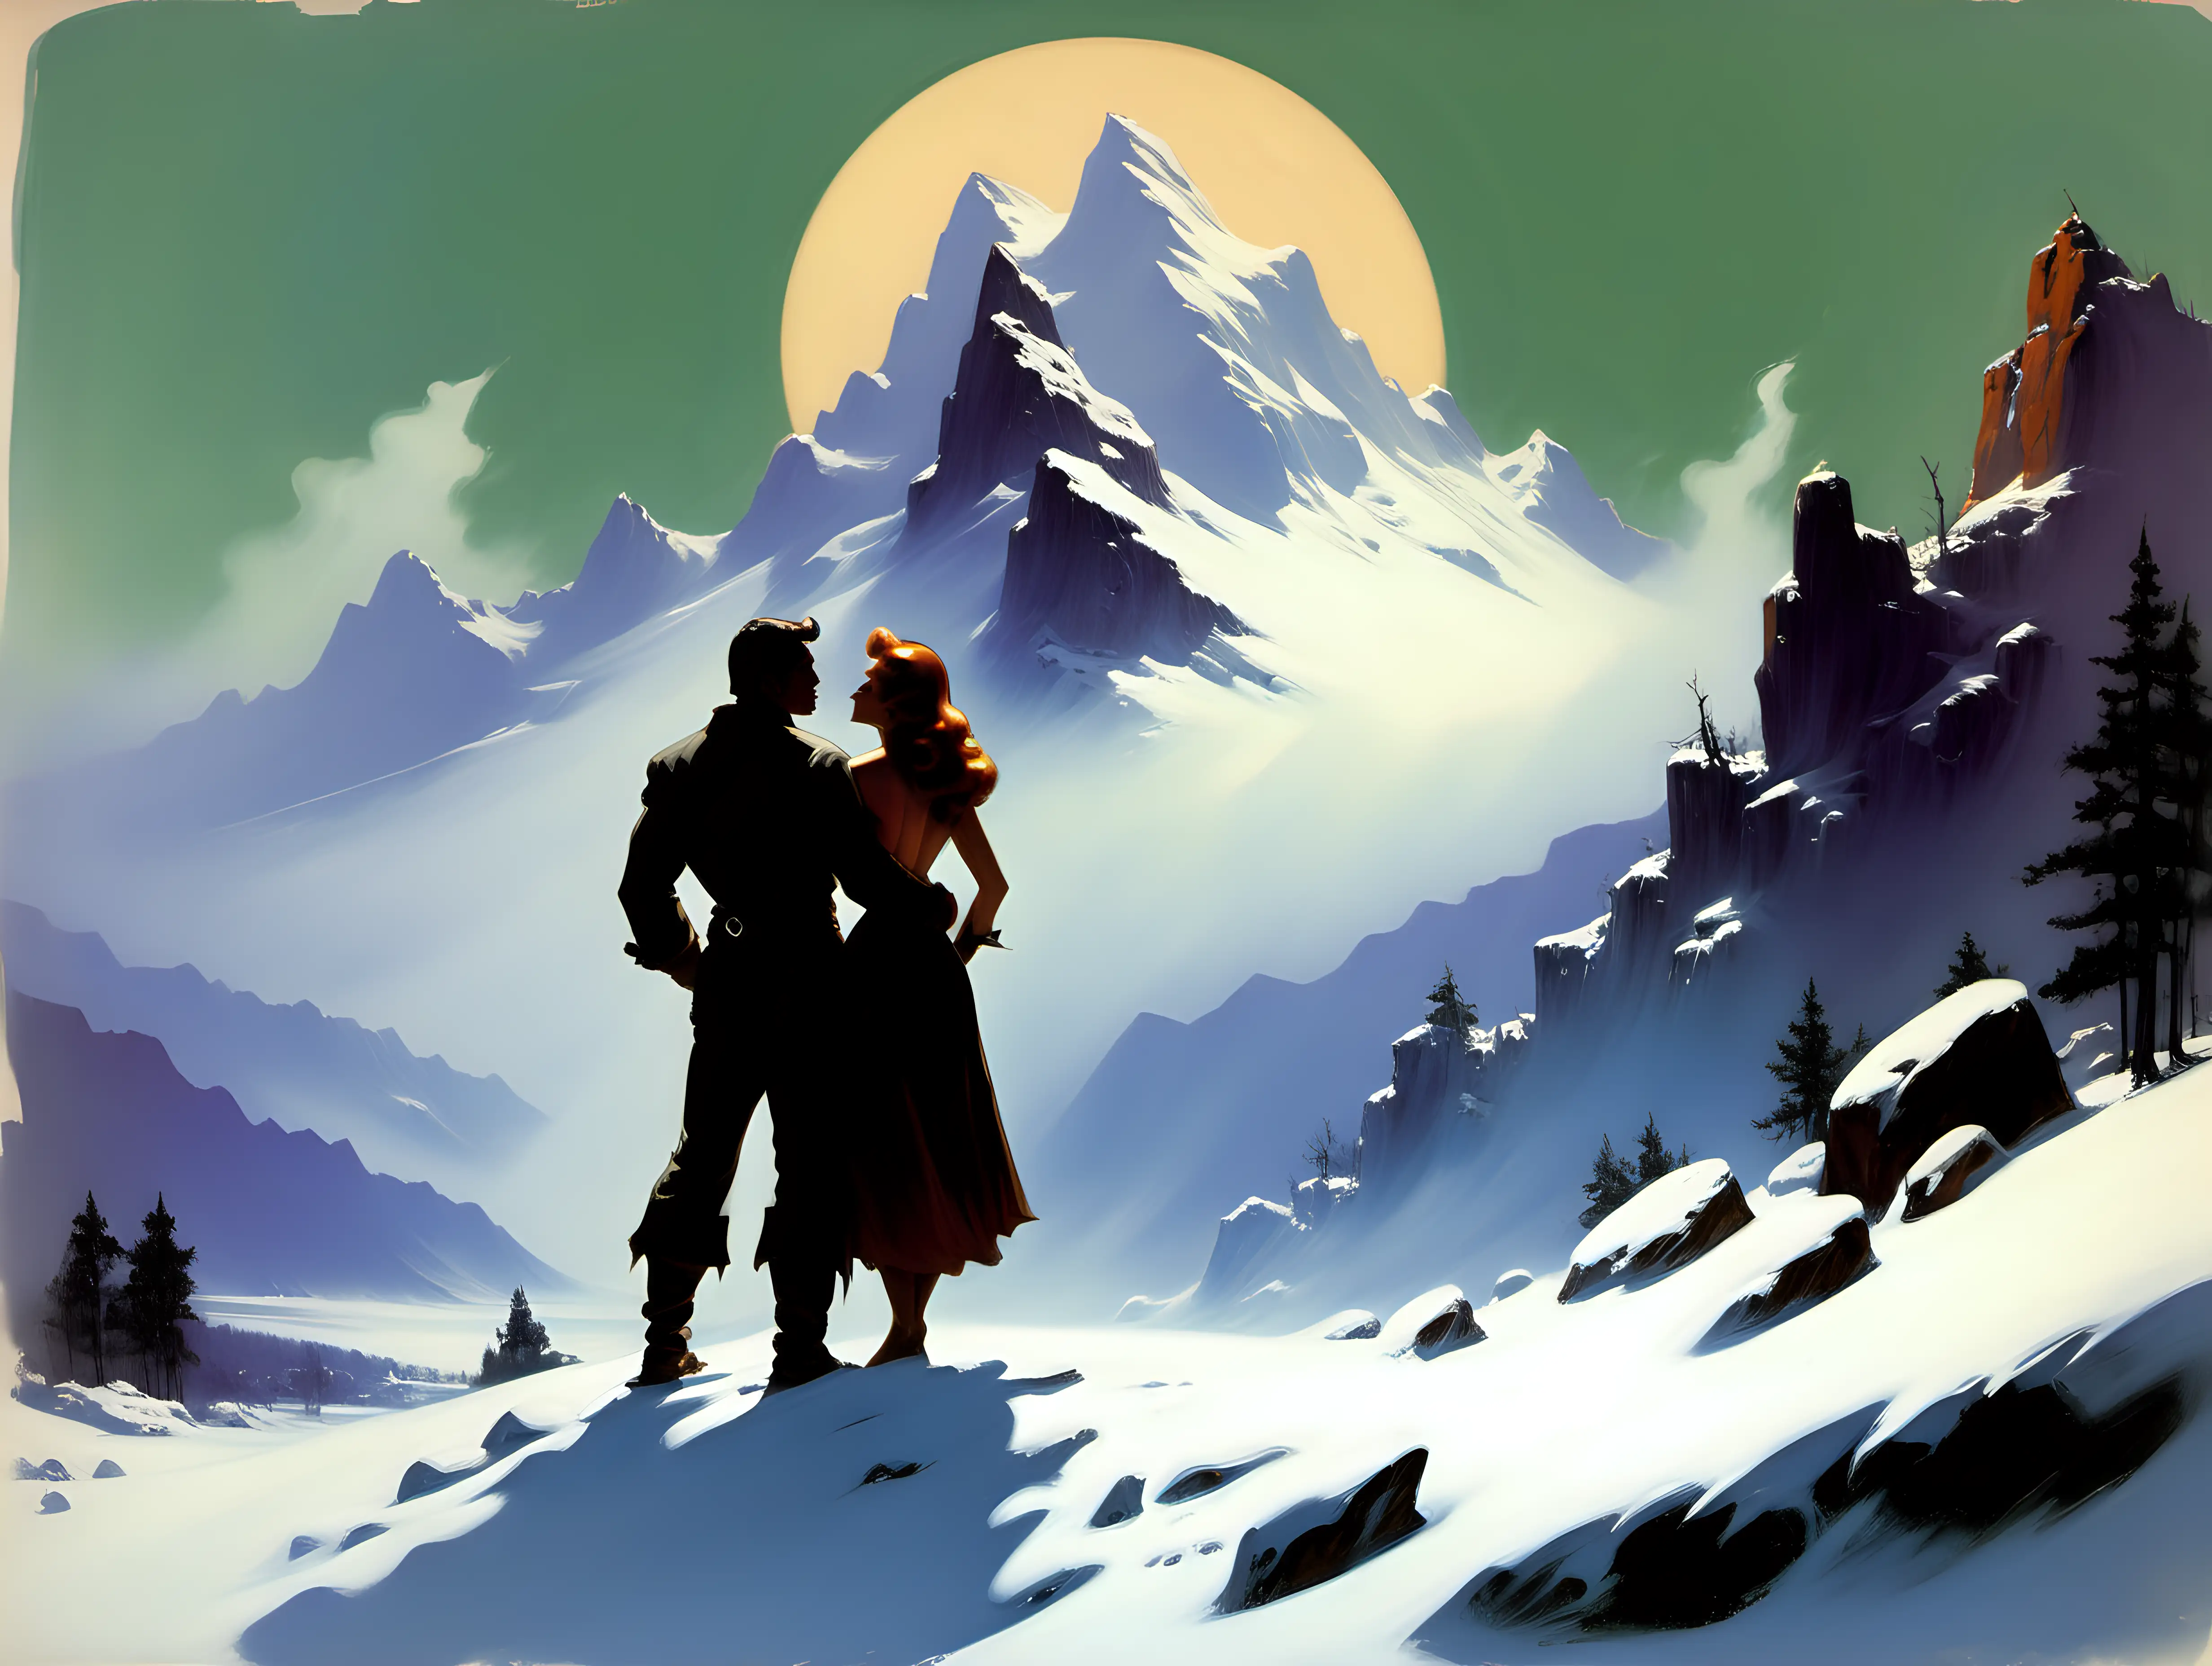 lovers looking at a snow capped mountain in style of romanticism by Frank Frazetta